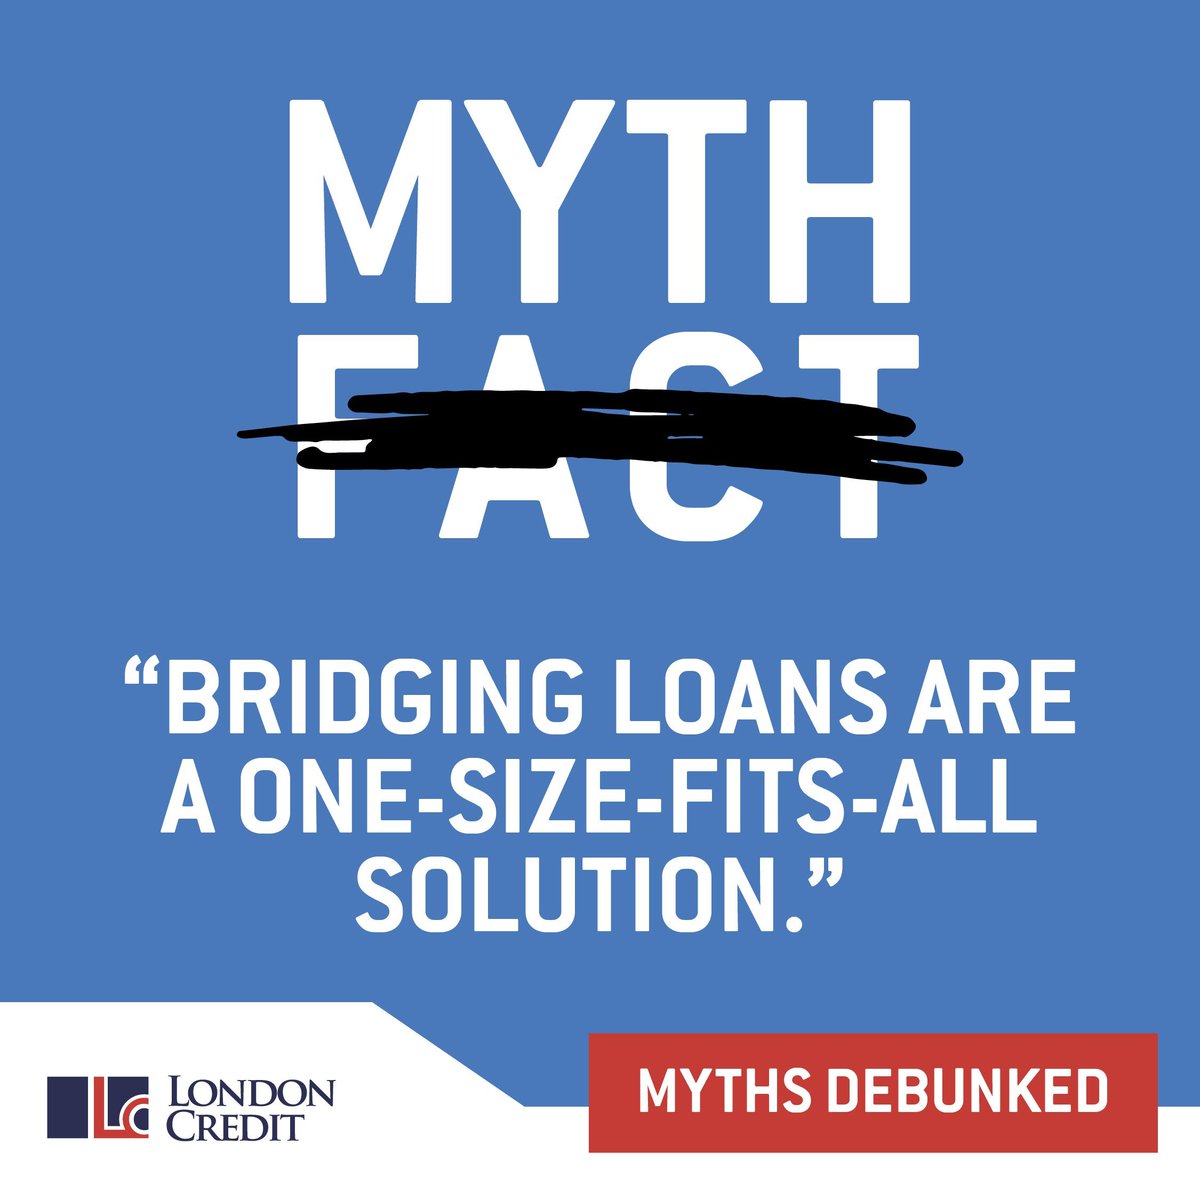 Misconception of the month: bridging loans are a one-size-fits-all solution.
The Truth: Your financial needs are unique, and so are our solutions. At #LondonCredit, we tailor our #bridgingloans to fit your specific requirements.